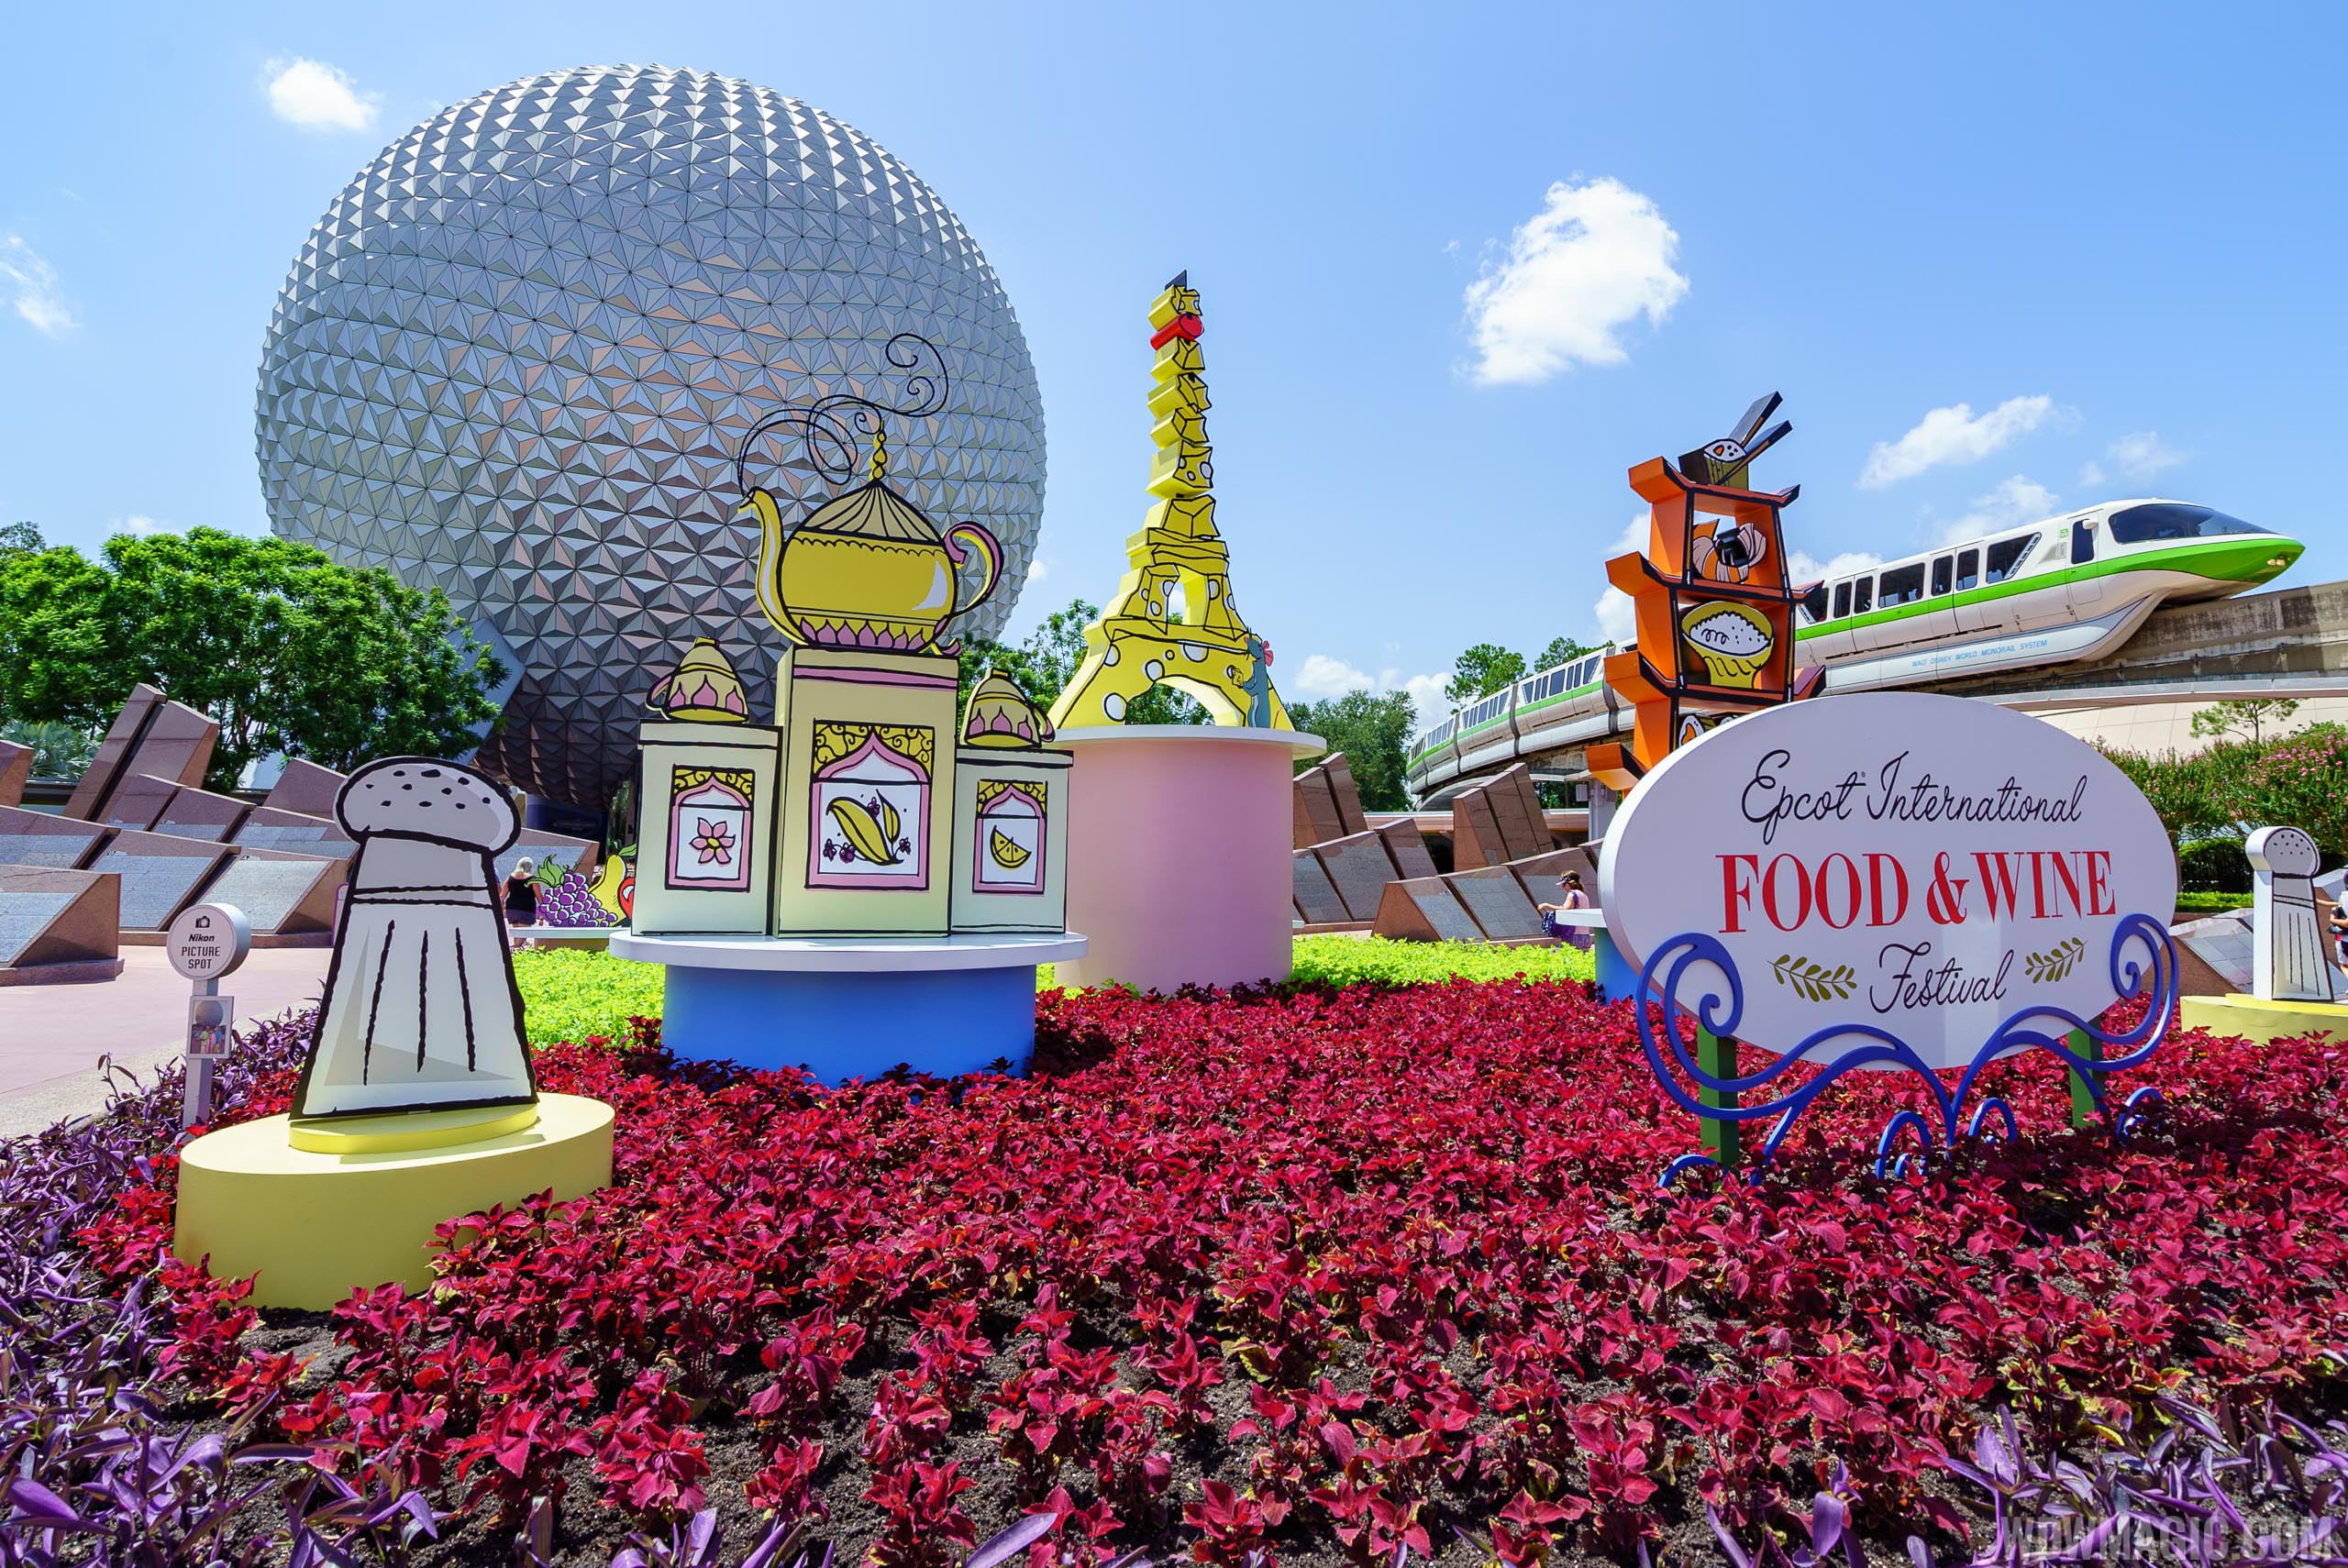 PHOTOS The 22nd Epcot International Food and Wine Festival begins today